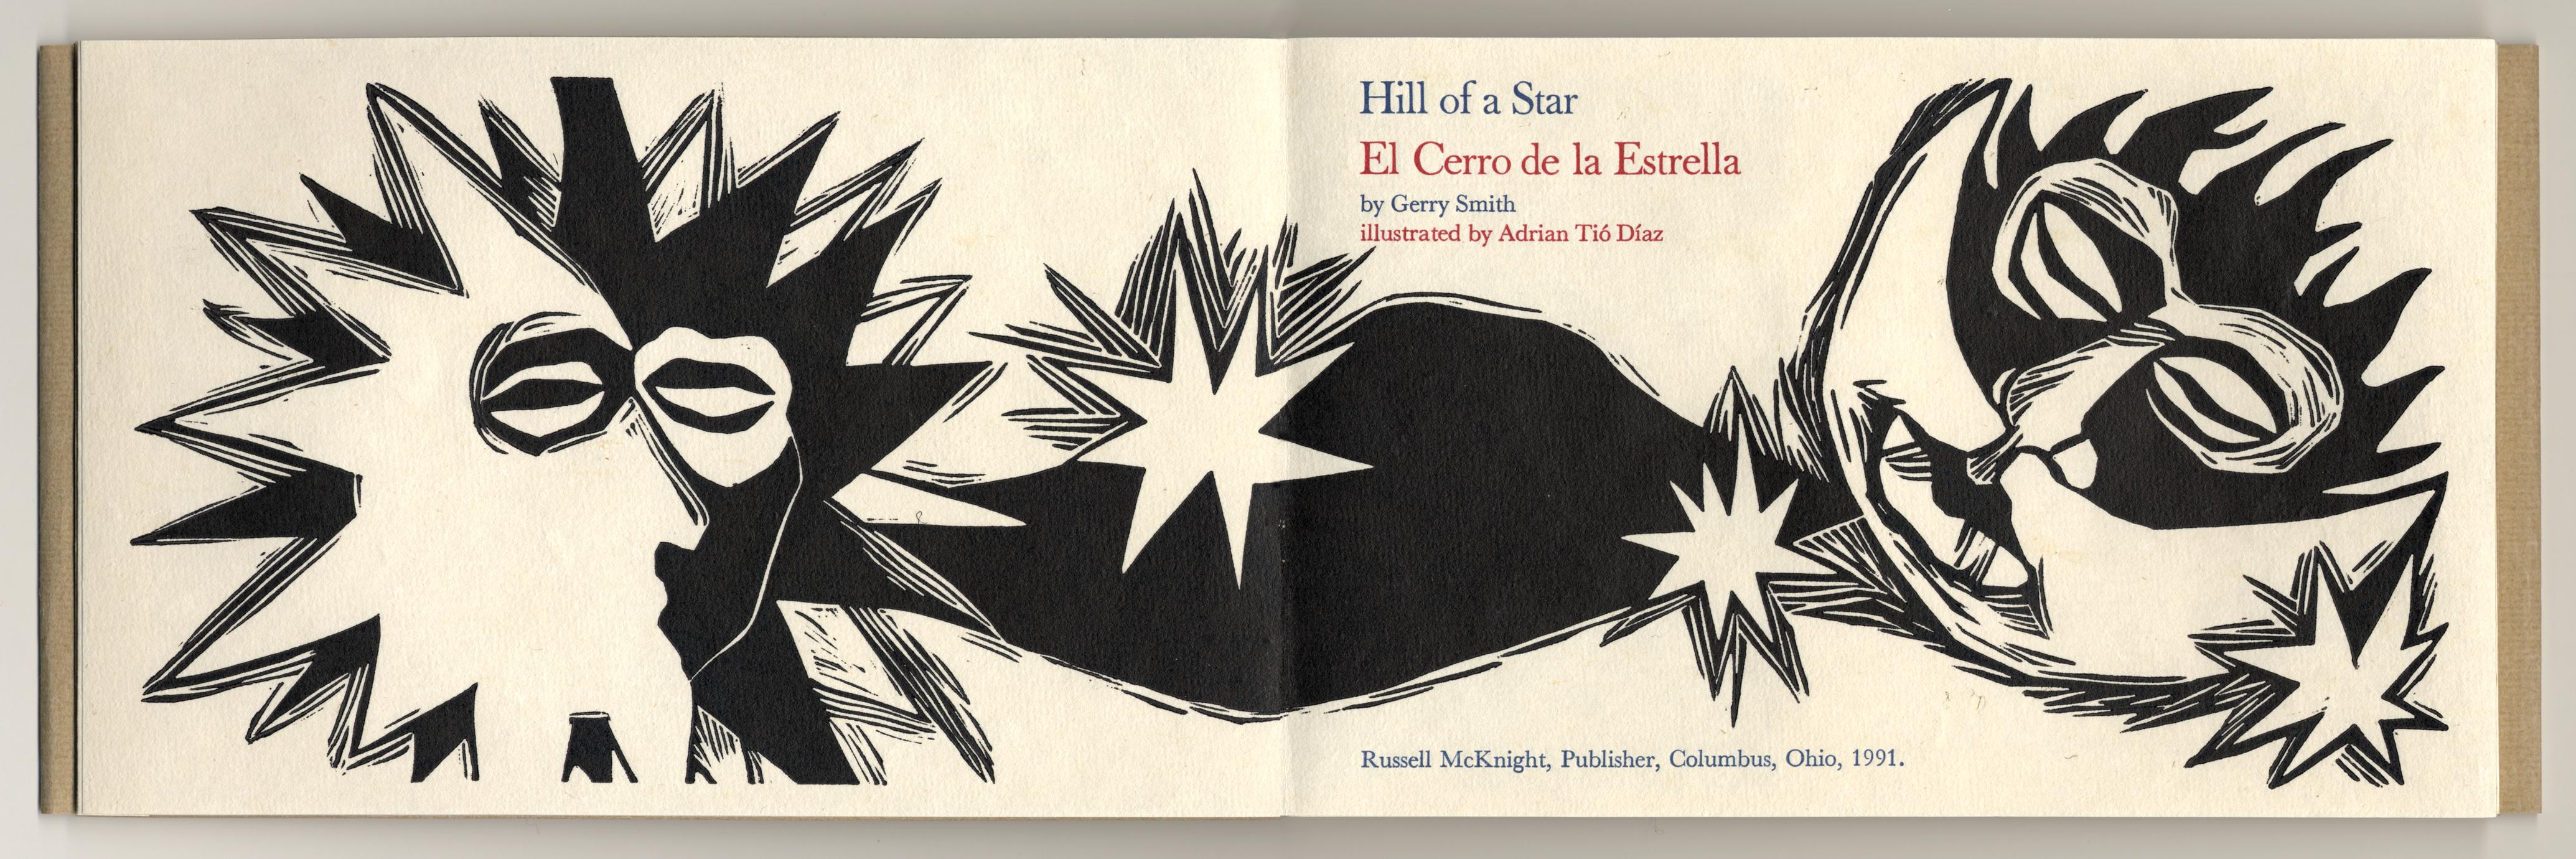 Hill of a star (1 of 2)